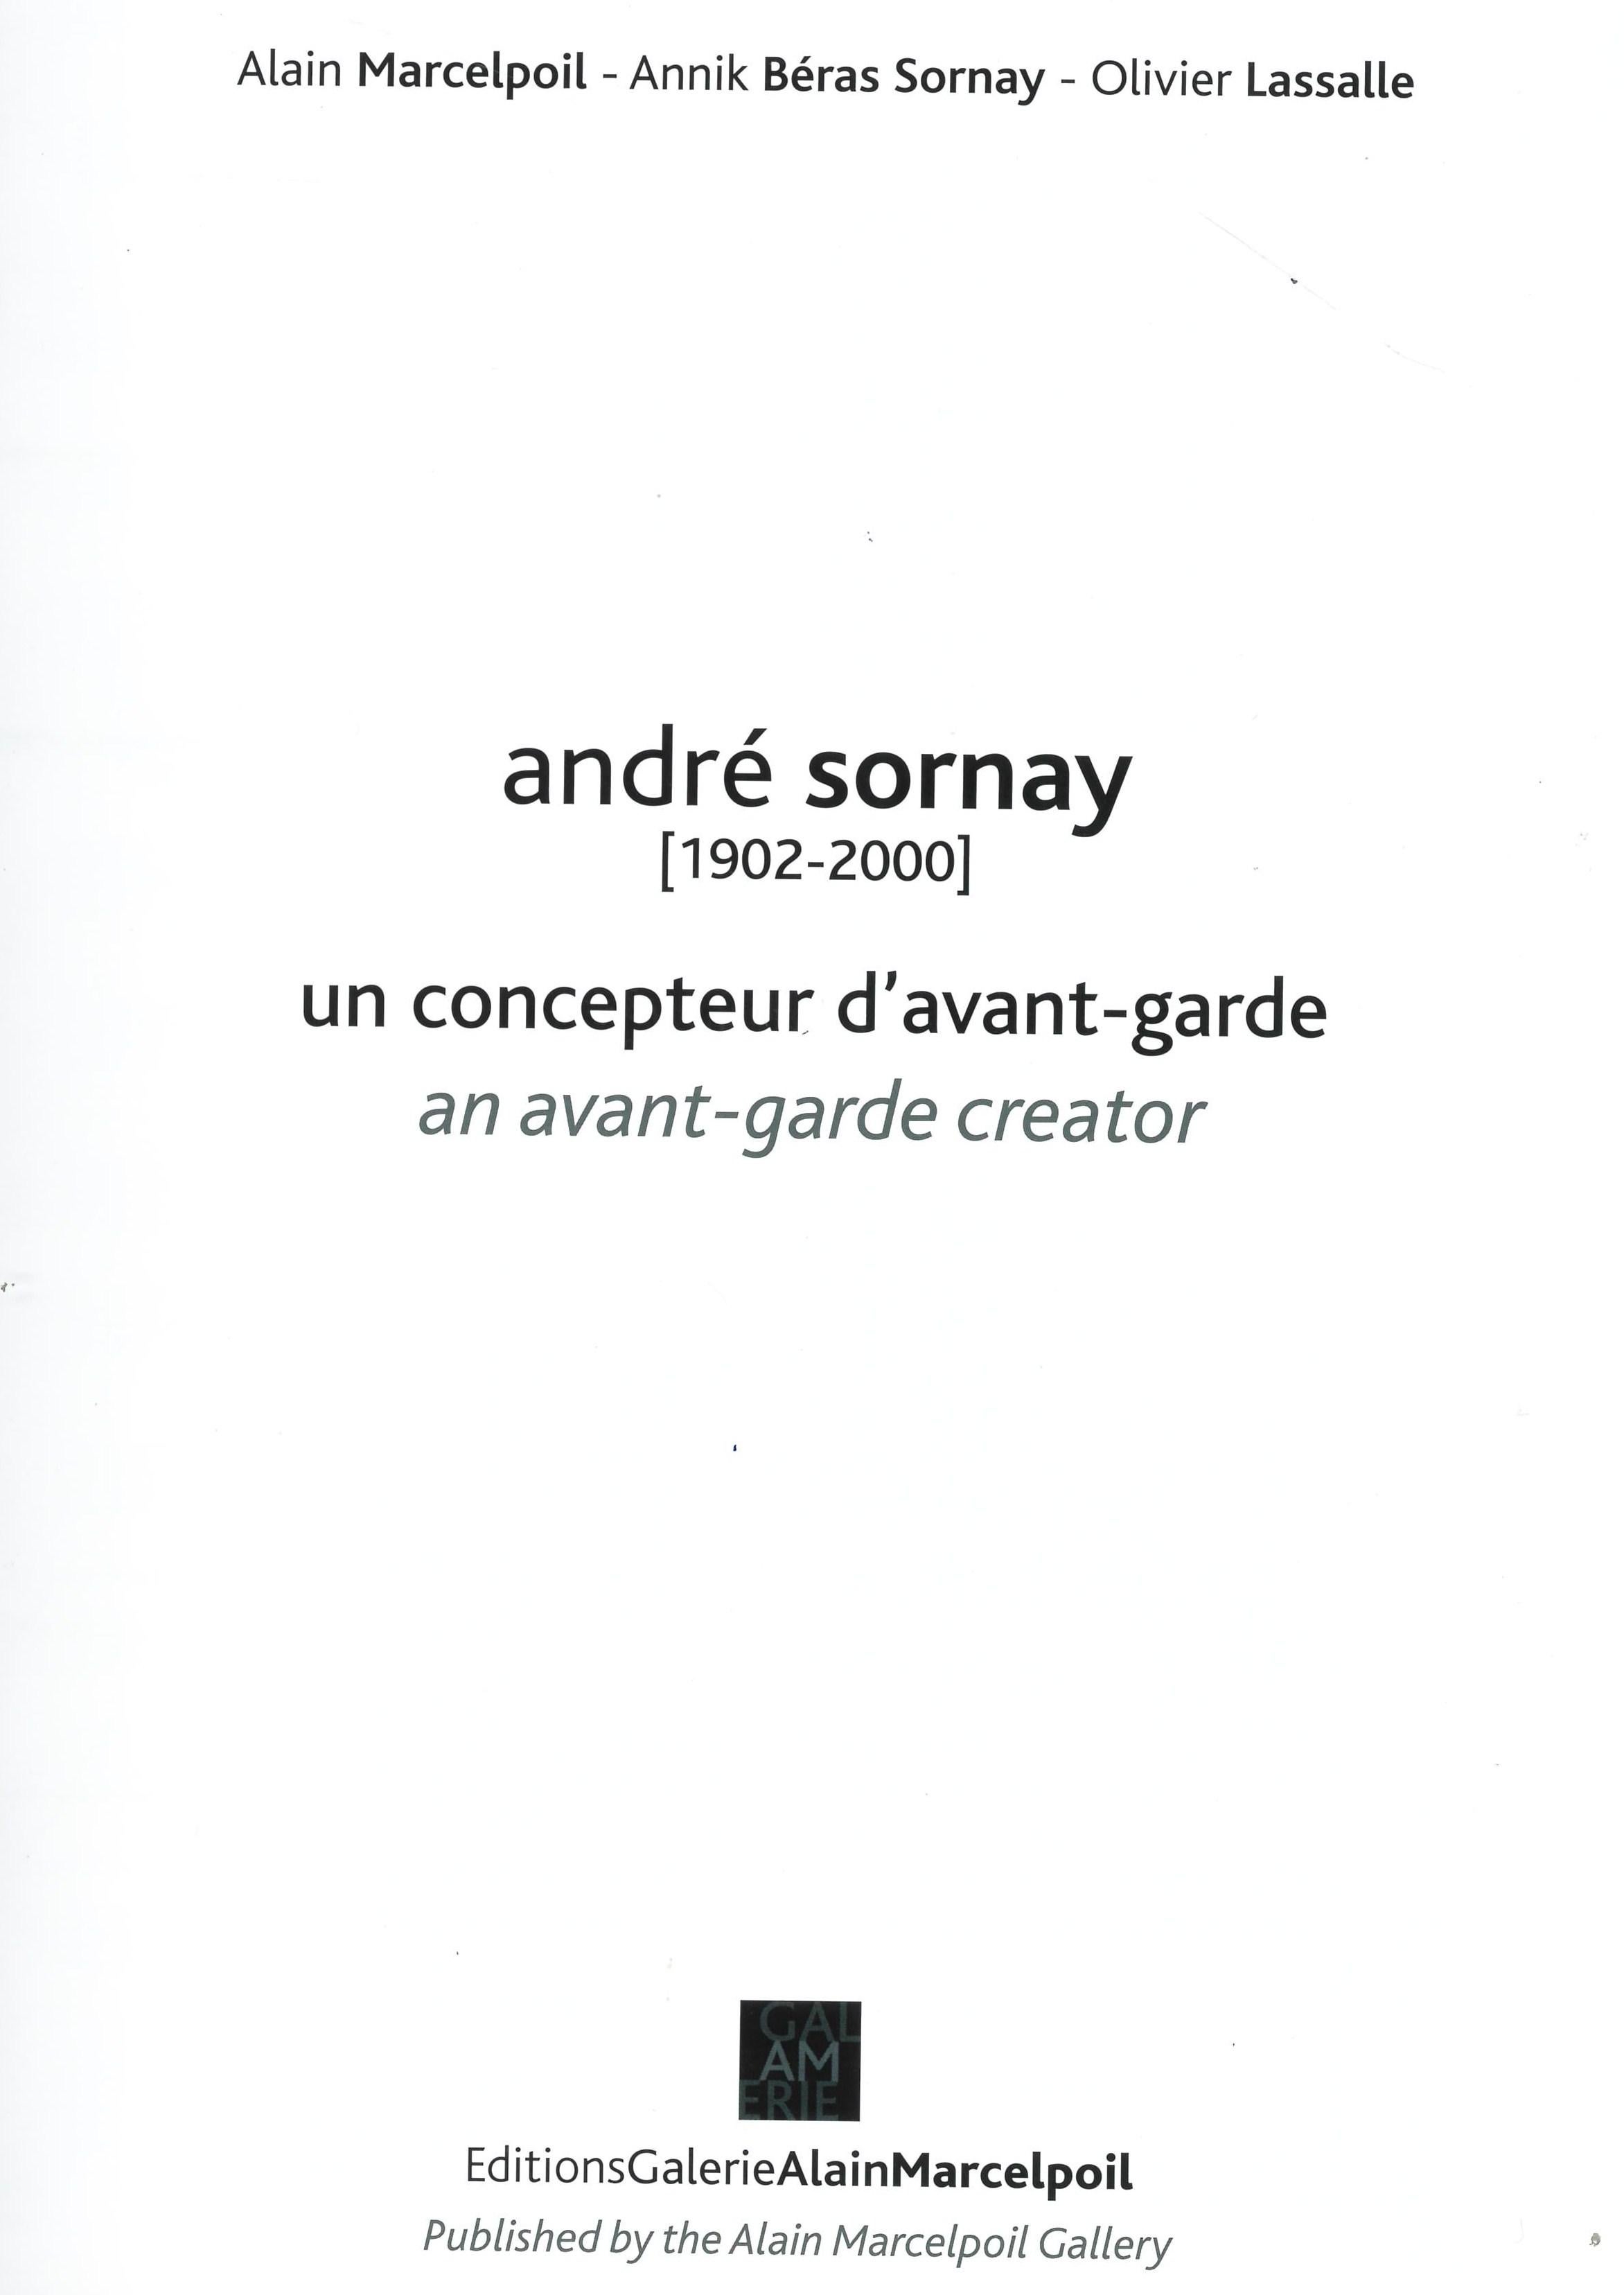 Published in 2010, this is the much anticipated book on the life and career of Signe Sornay, with text in English and French. The book was published by Galerie Alain Marcelpoil who are renowned experts in Art Deco furniture and 20th century